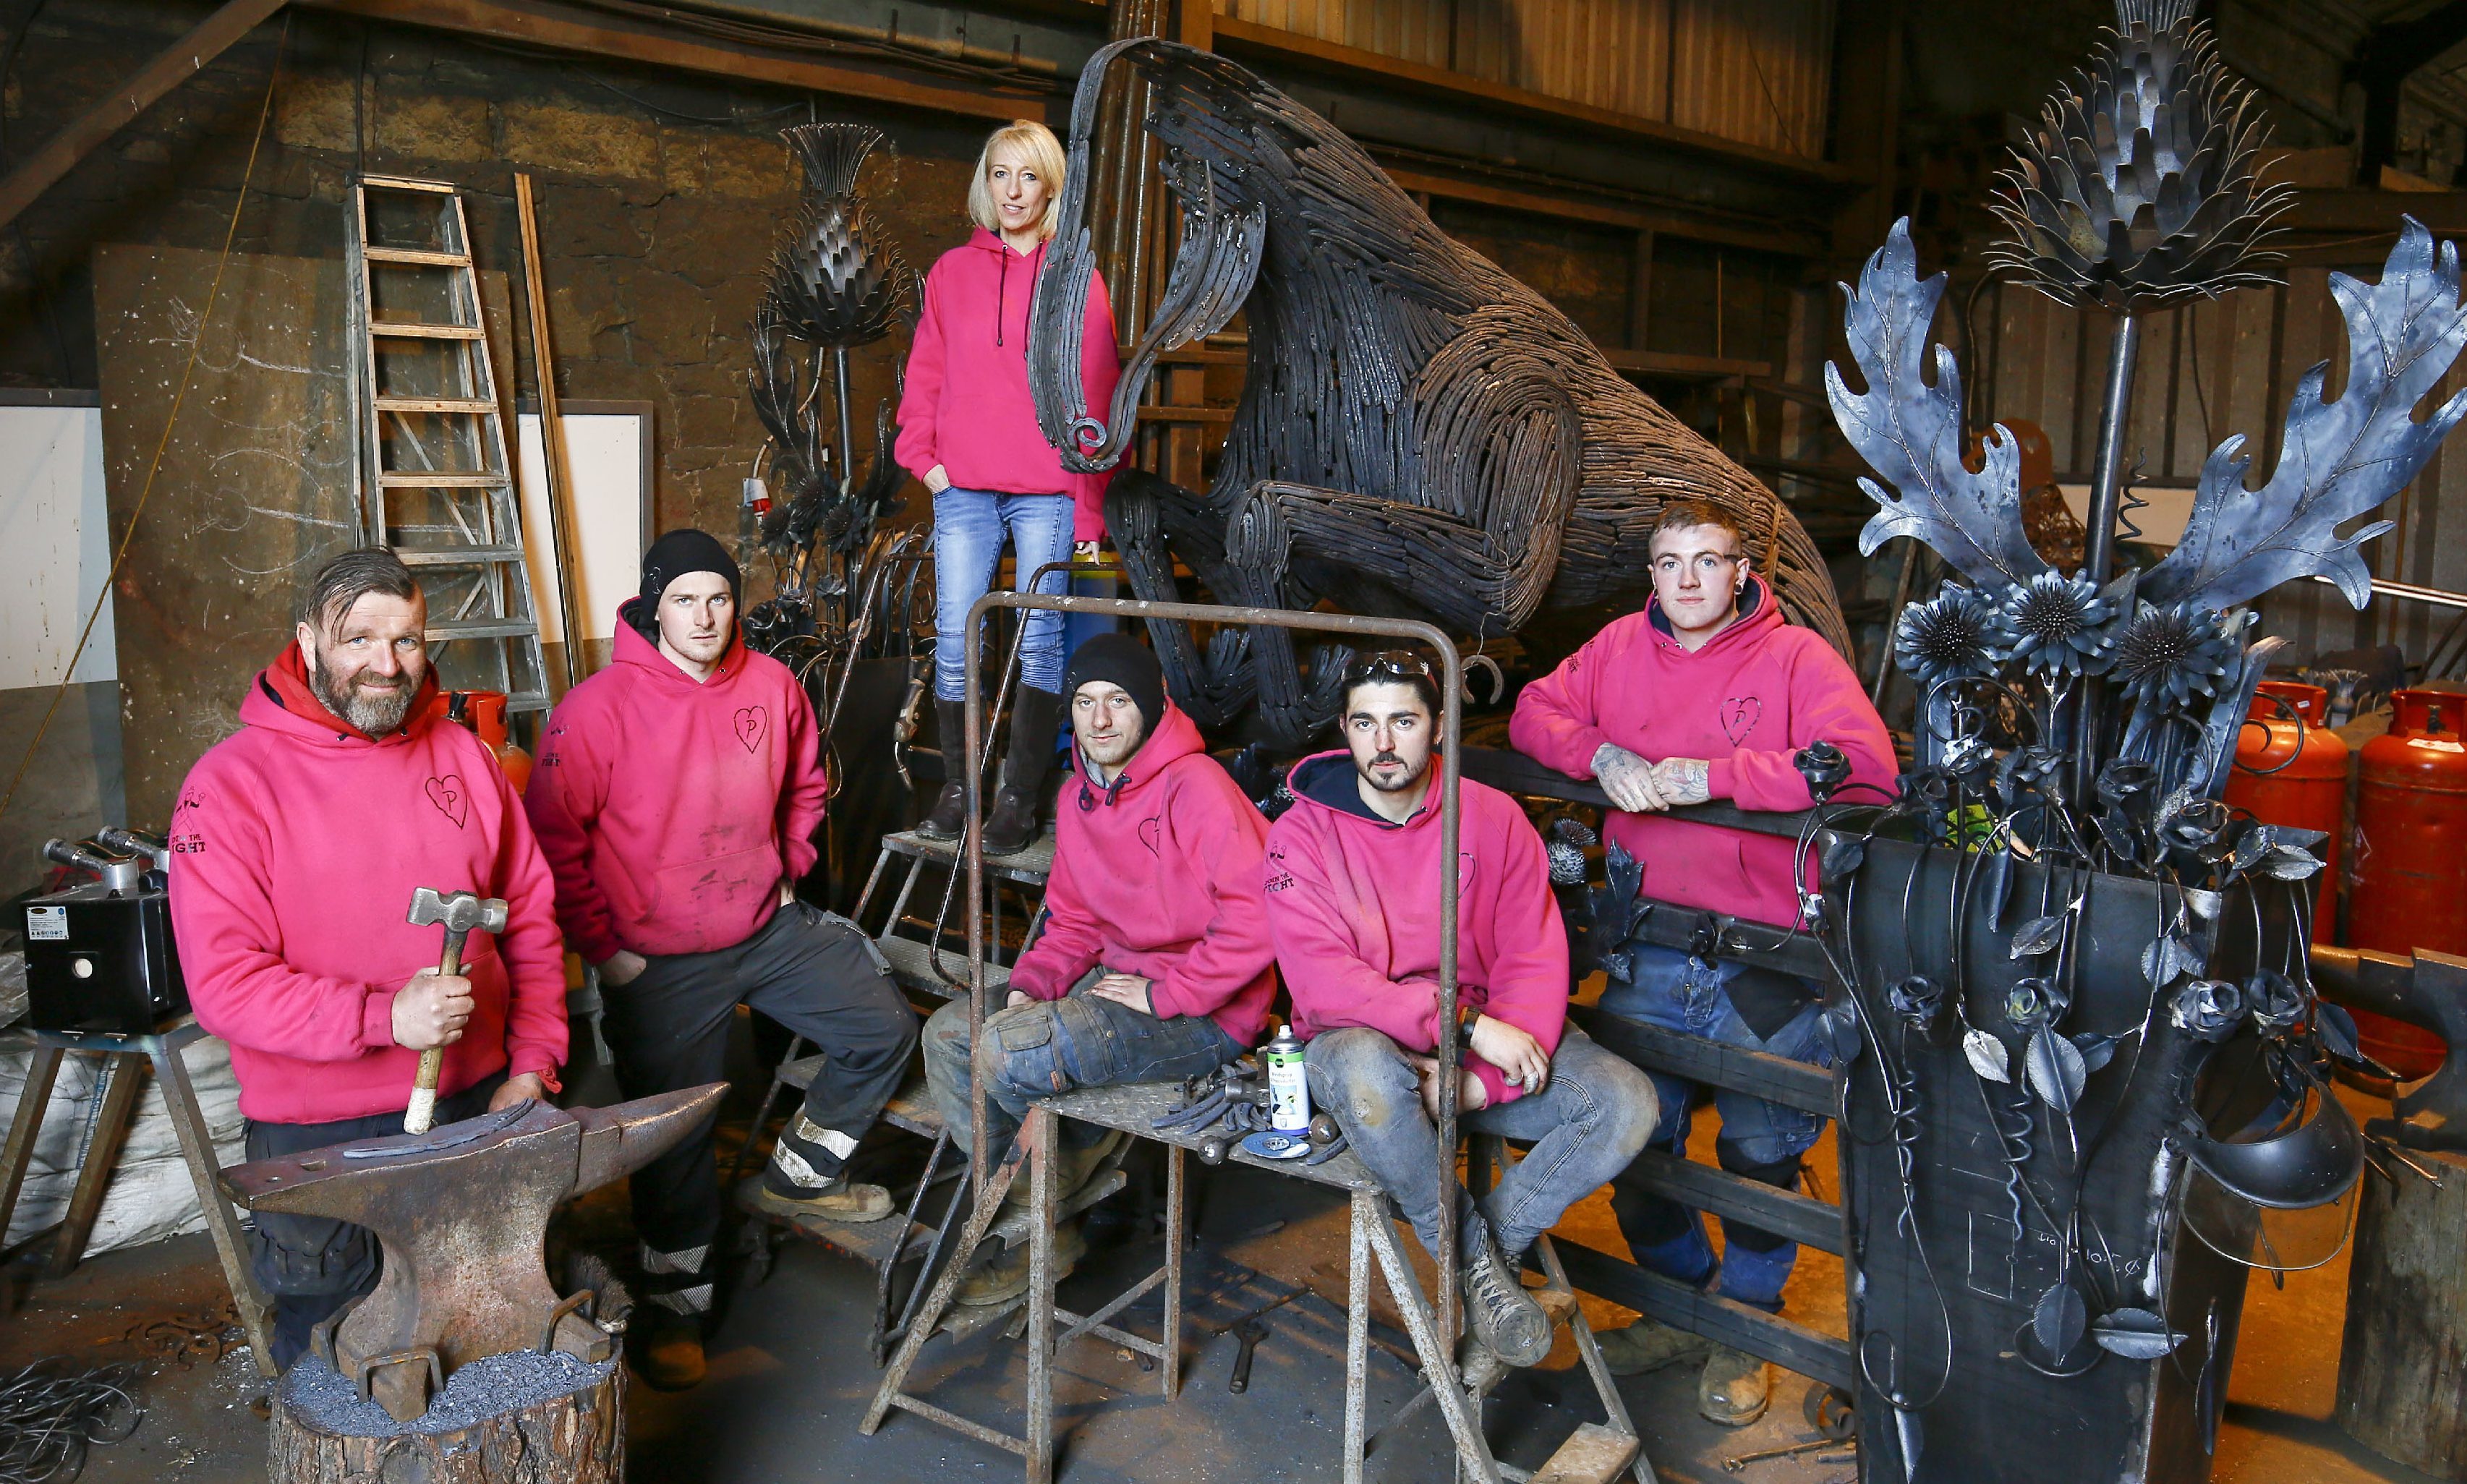 Blacksmith Kevin Paxton and his team within the forge at Ransfield farm